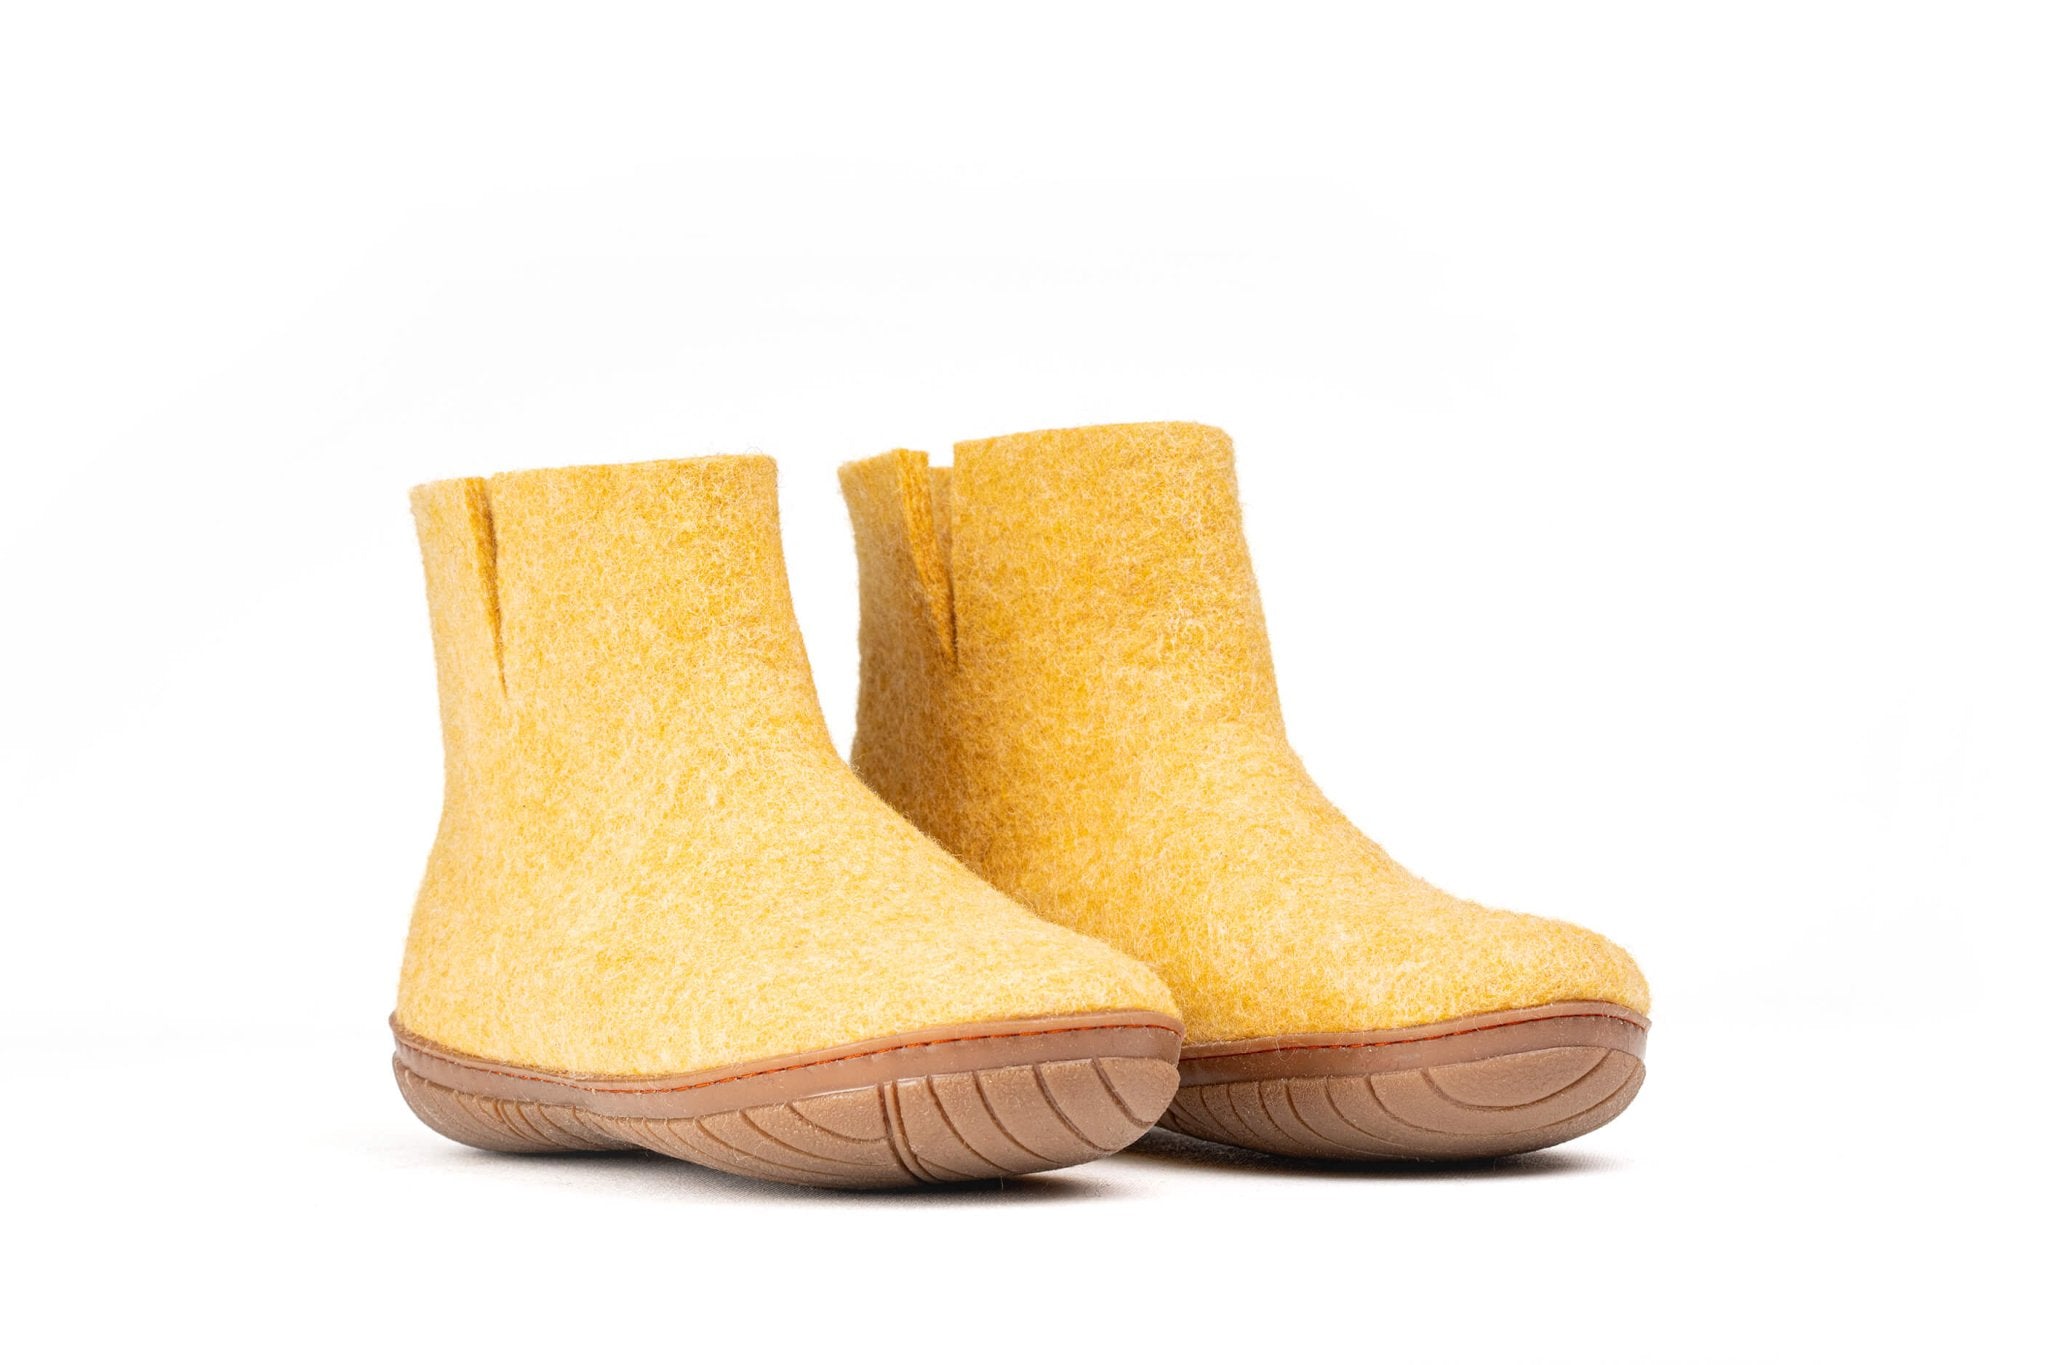 Outdoor Low Boots With Rubber Sole - Mustard - Woollyes